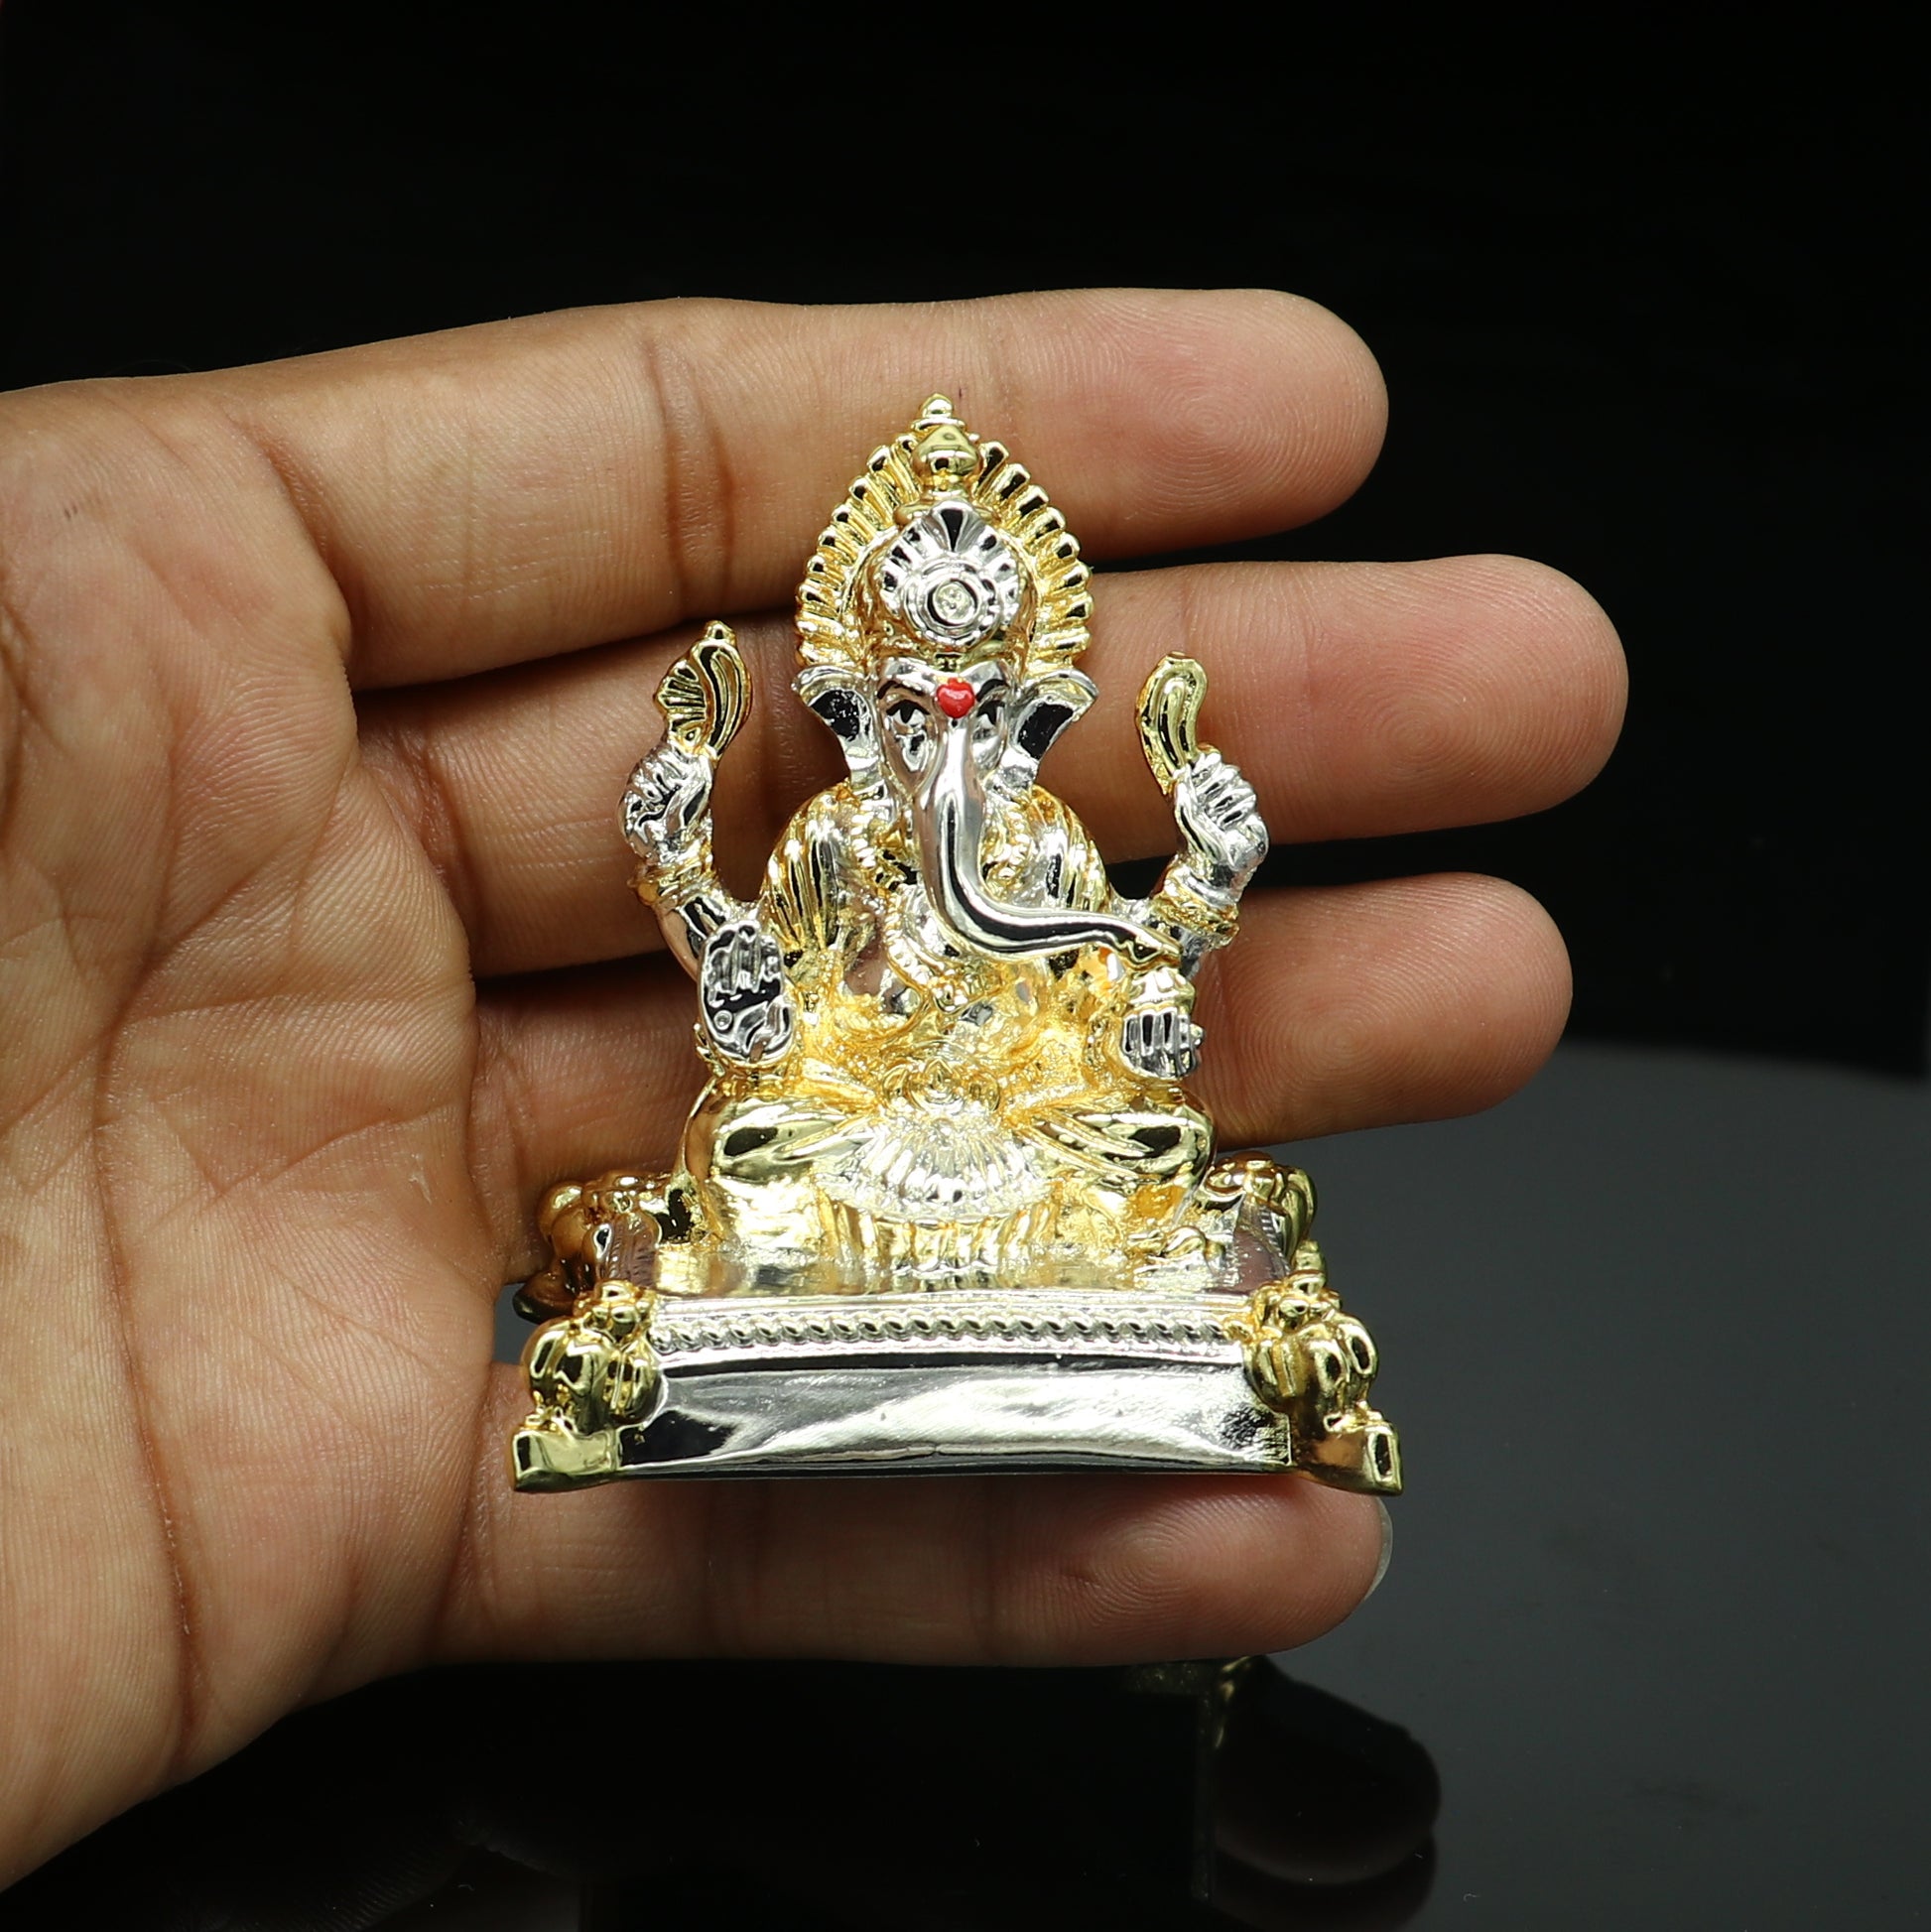 Silver Ganesh Outside Silver Covering Inside Wax and Marble Lord Ganesha Silver Idol W1 - TRIBAL ORNAMENTS